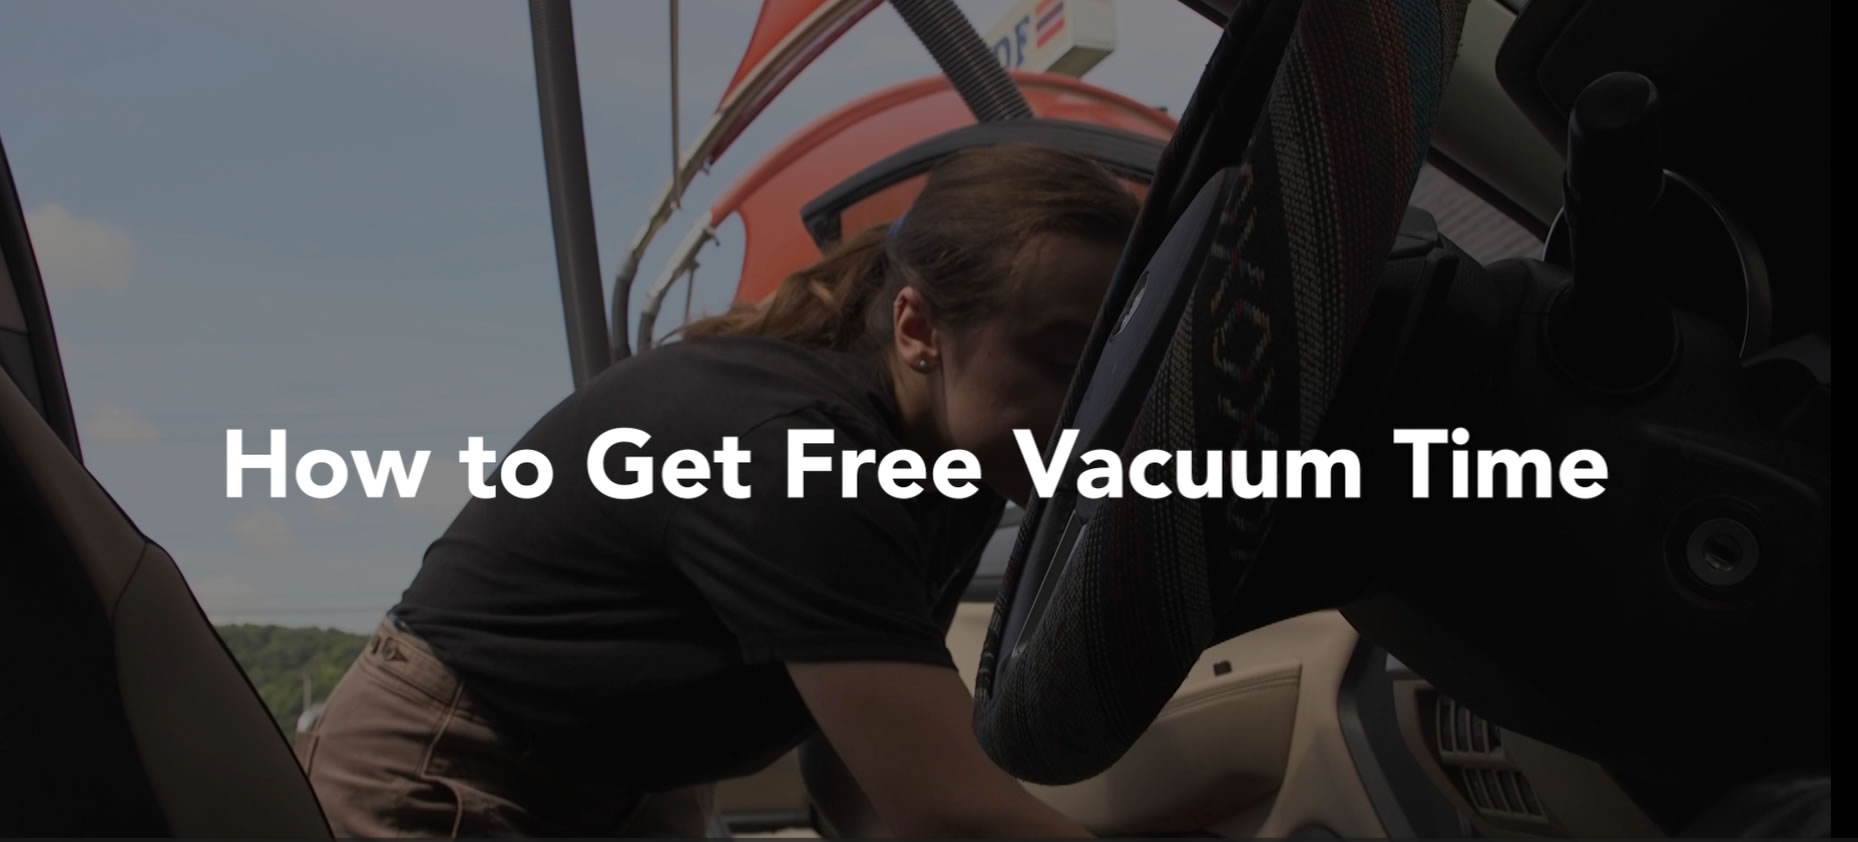 How to Get Free Vacuum Time